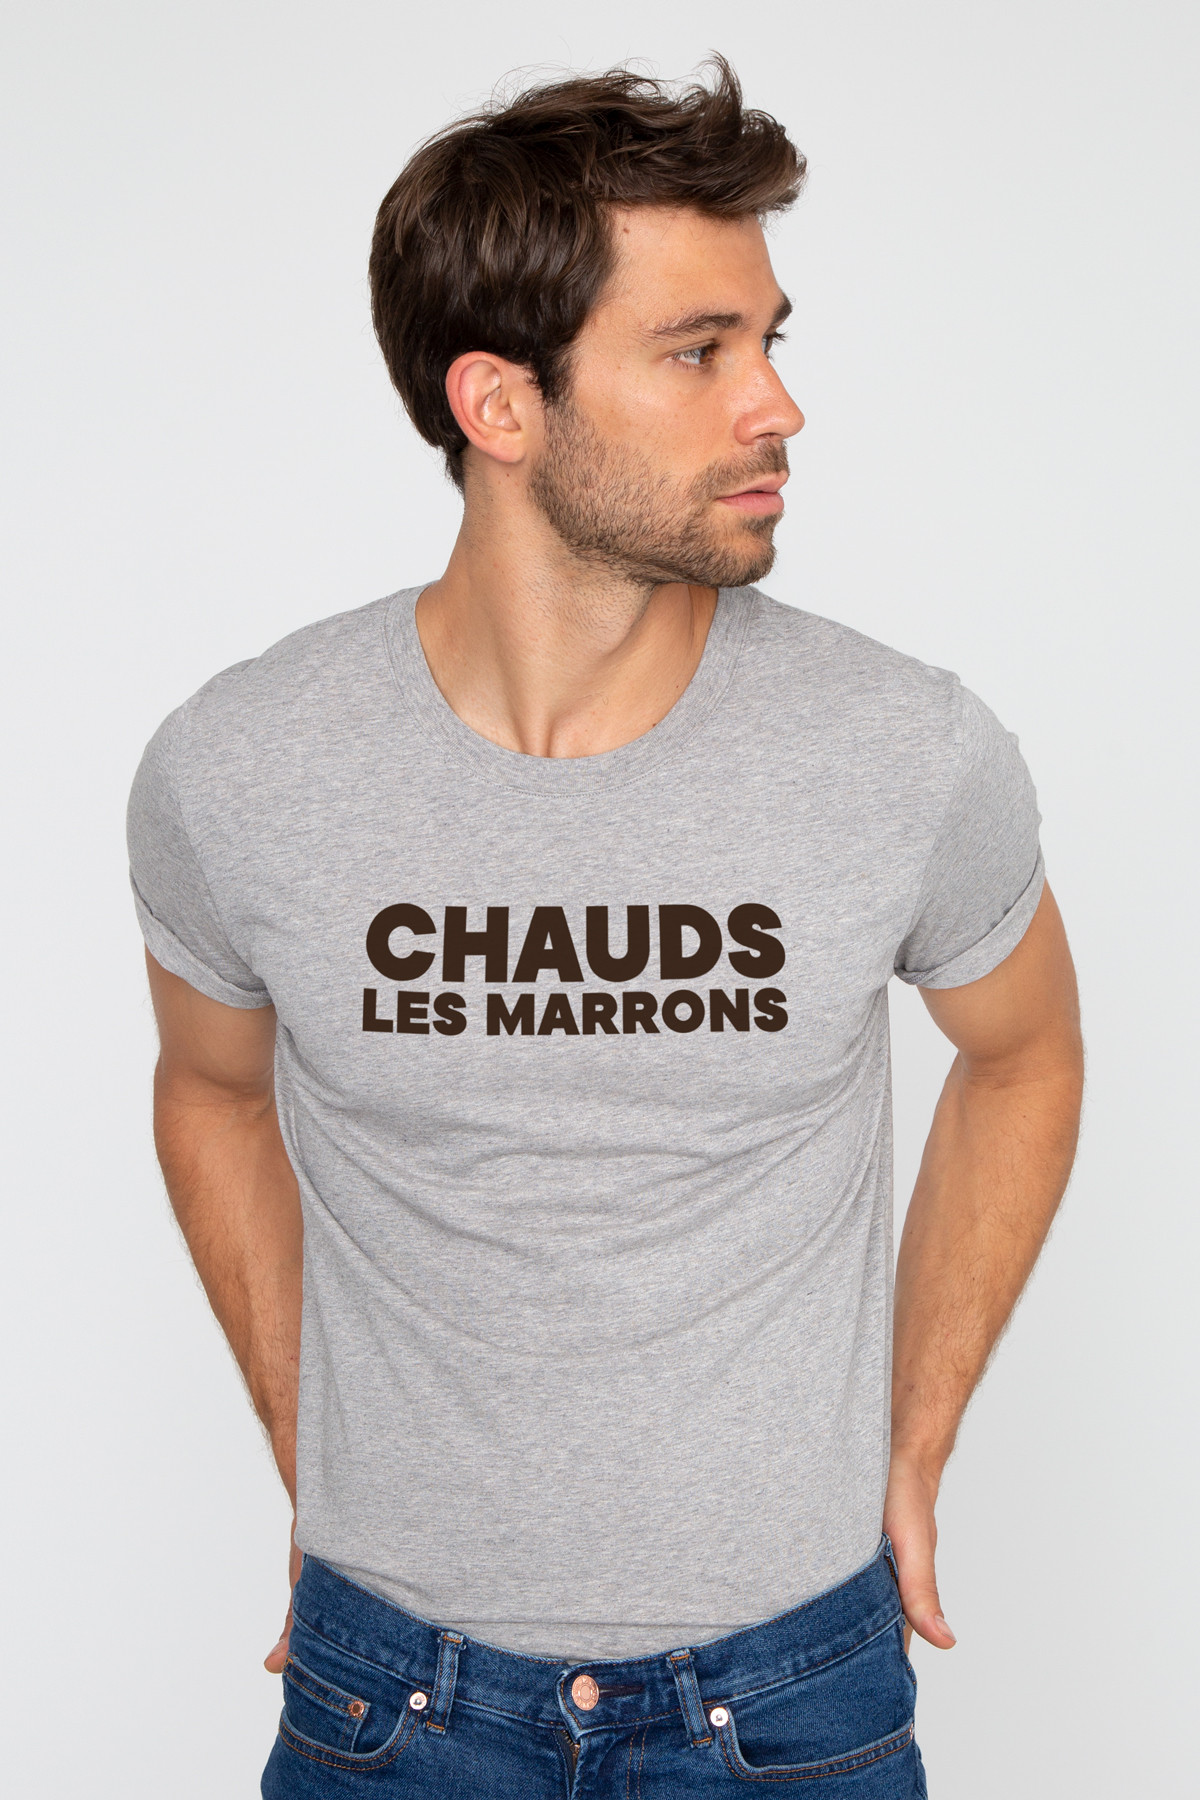 T-shirt CHAUDS LES MARRONS French Disorder